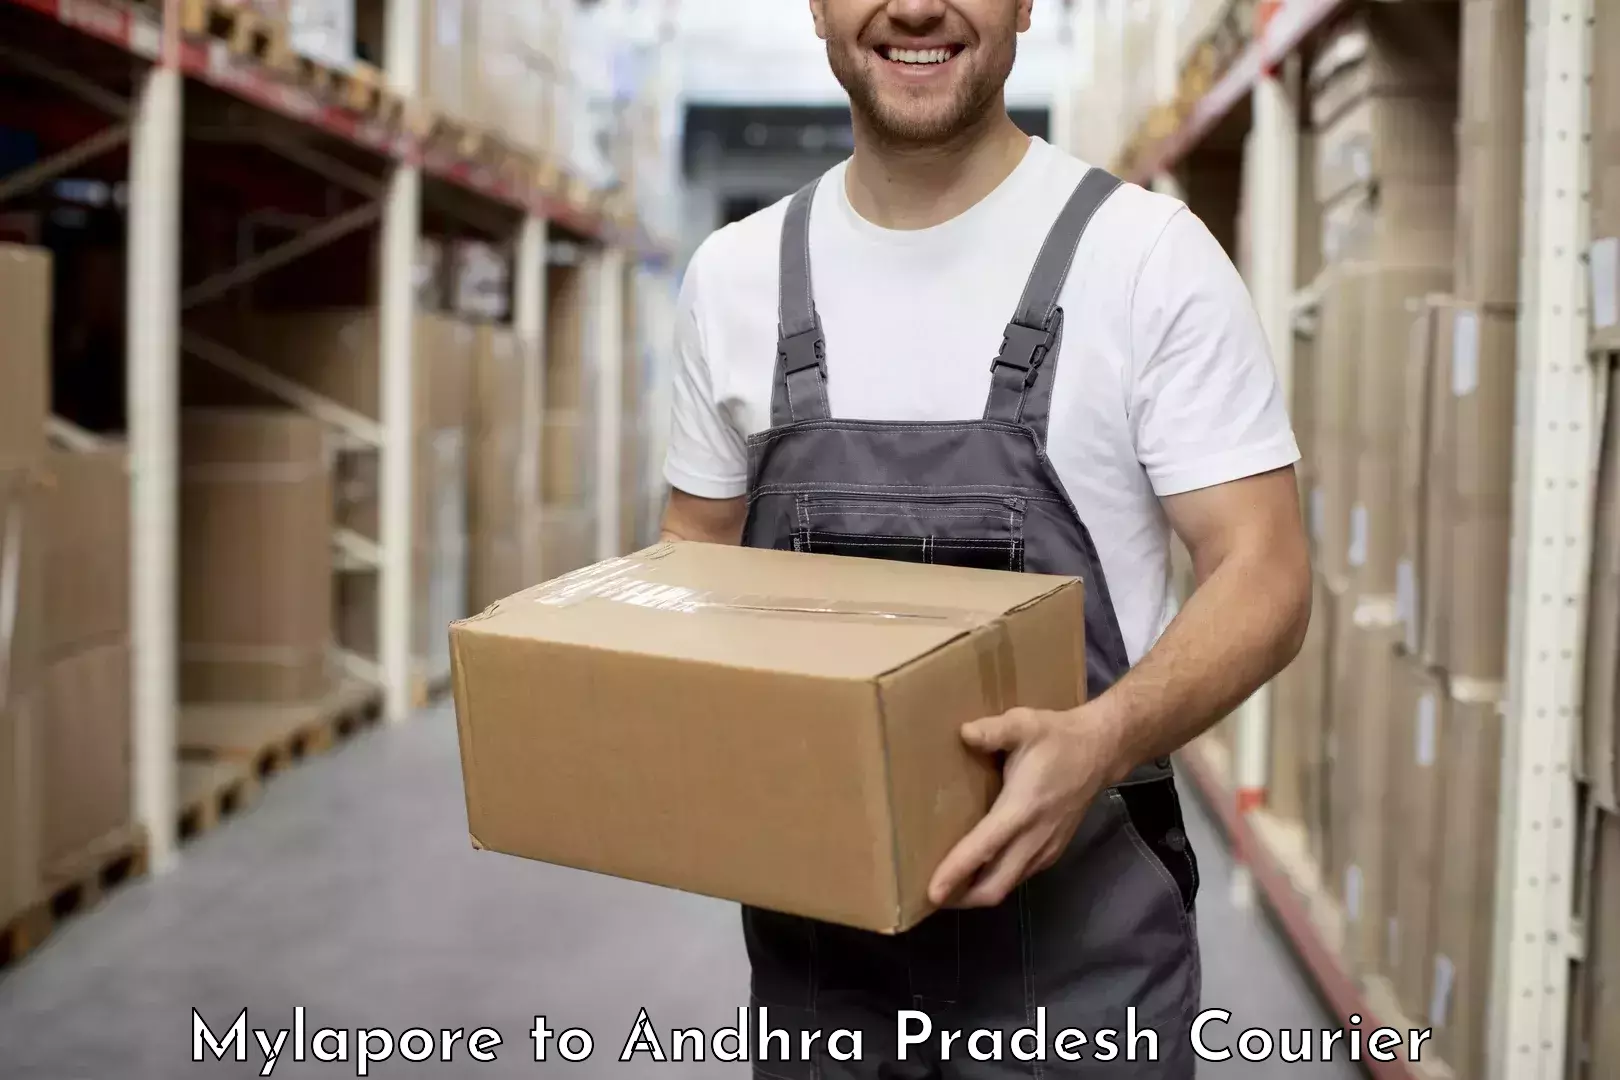 Professional courier handling Mylapore to Adoni